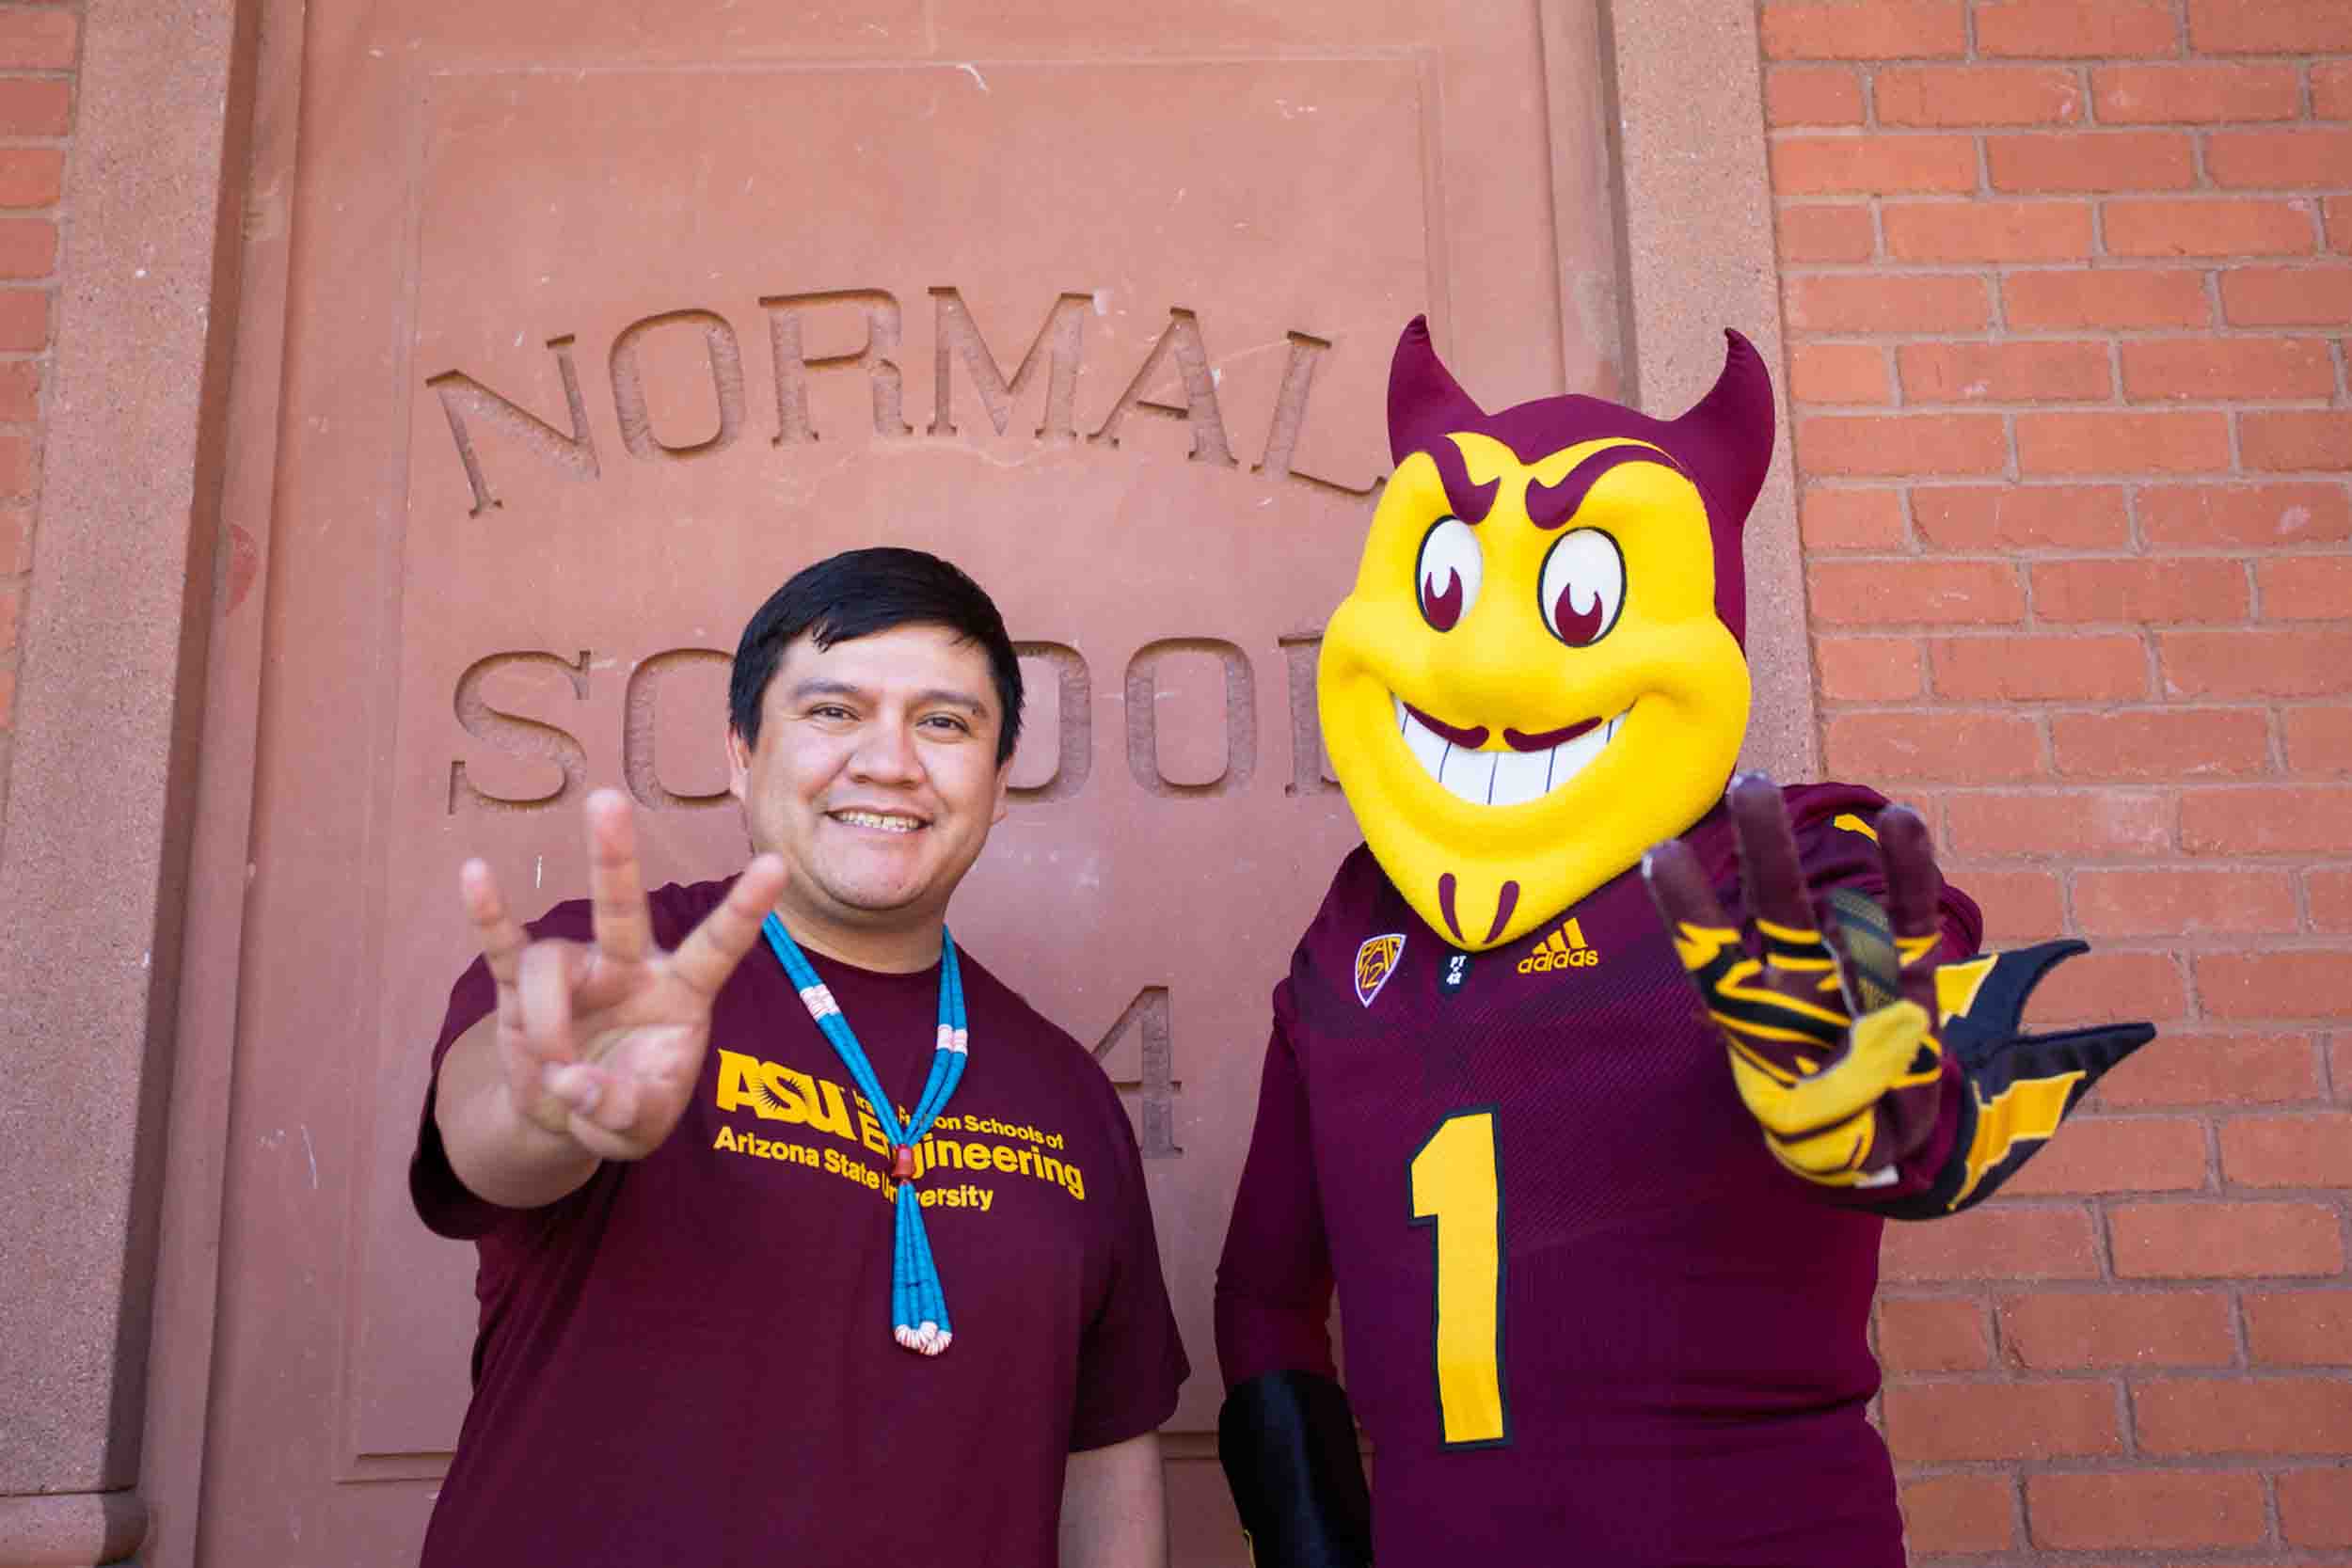 Royce Perez poses with mascot Sparky in front of ASU's Old Main building.